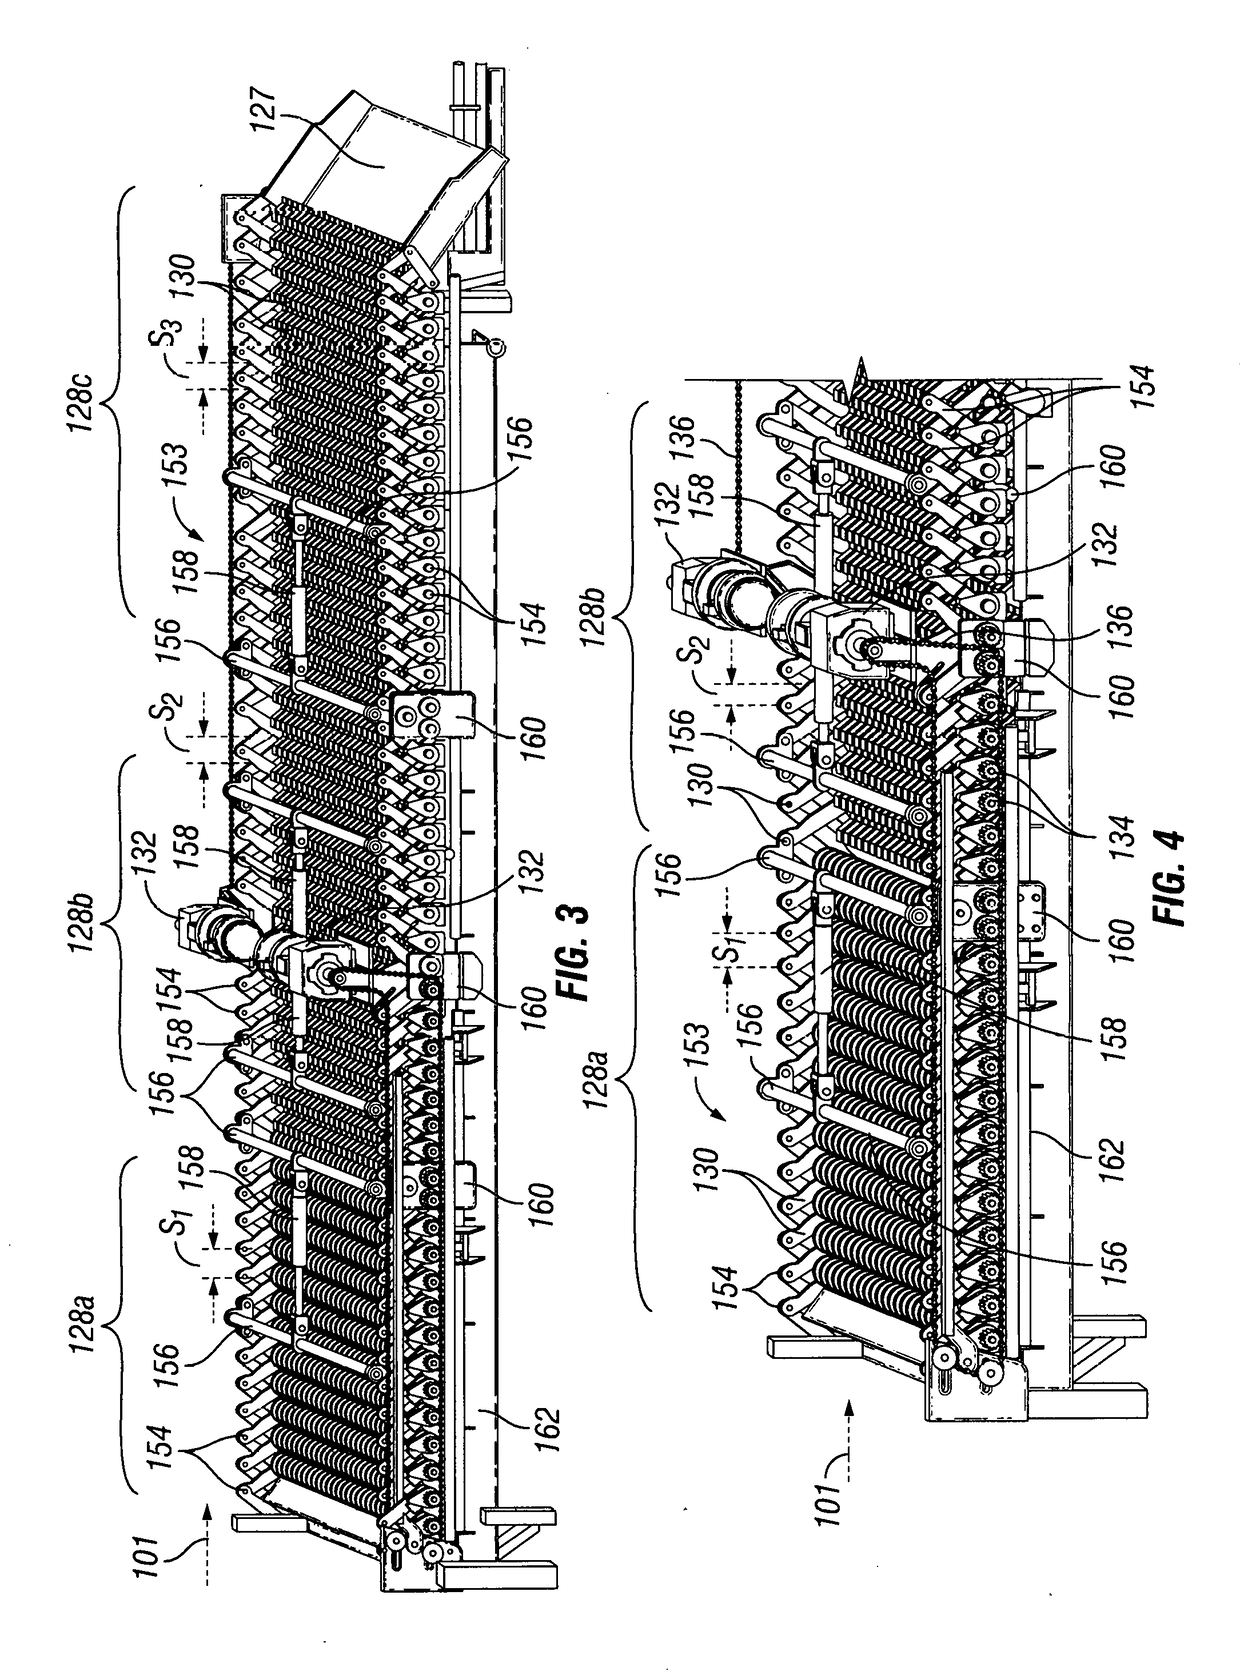 Seed potato cutting system with blade positioning mechanism